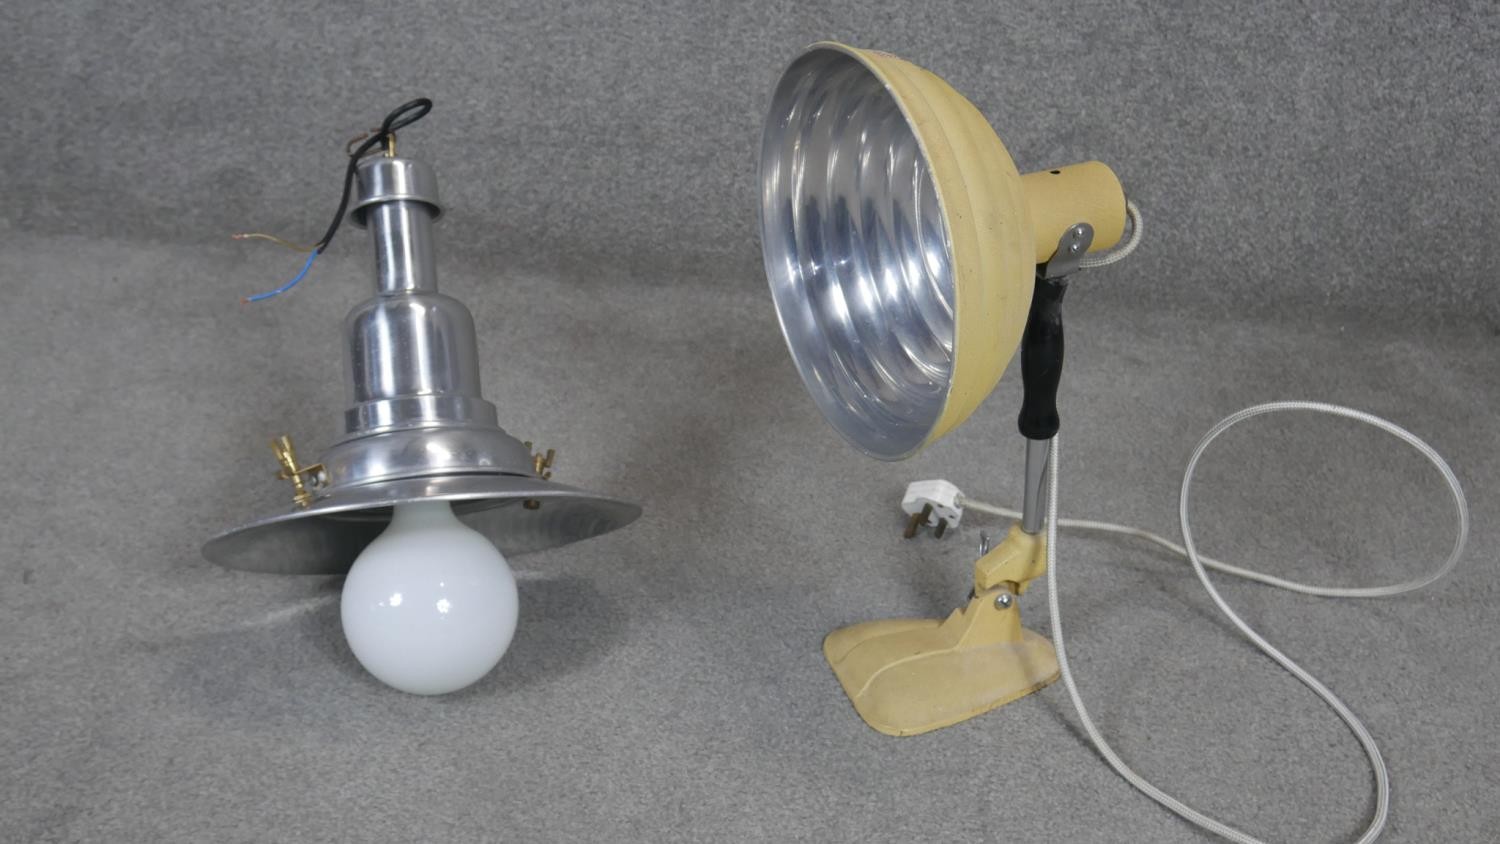 A vintage Pifco infra red heat lamp and a vintage style industrial type pendant lamp. H50cm